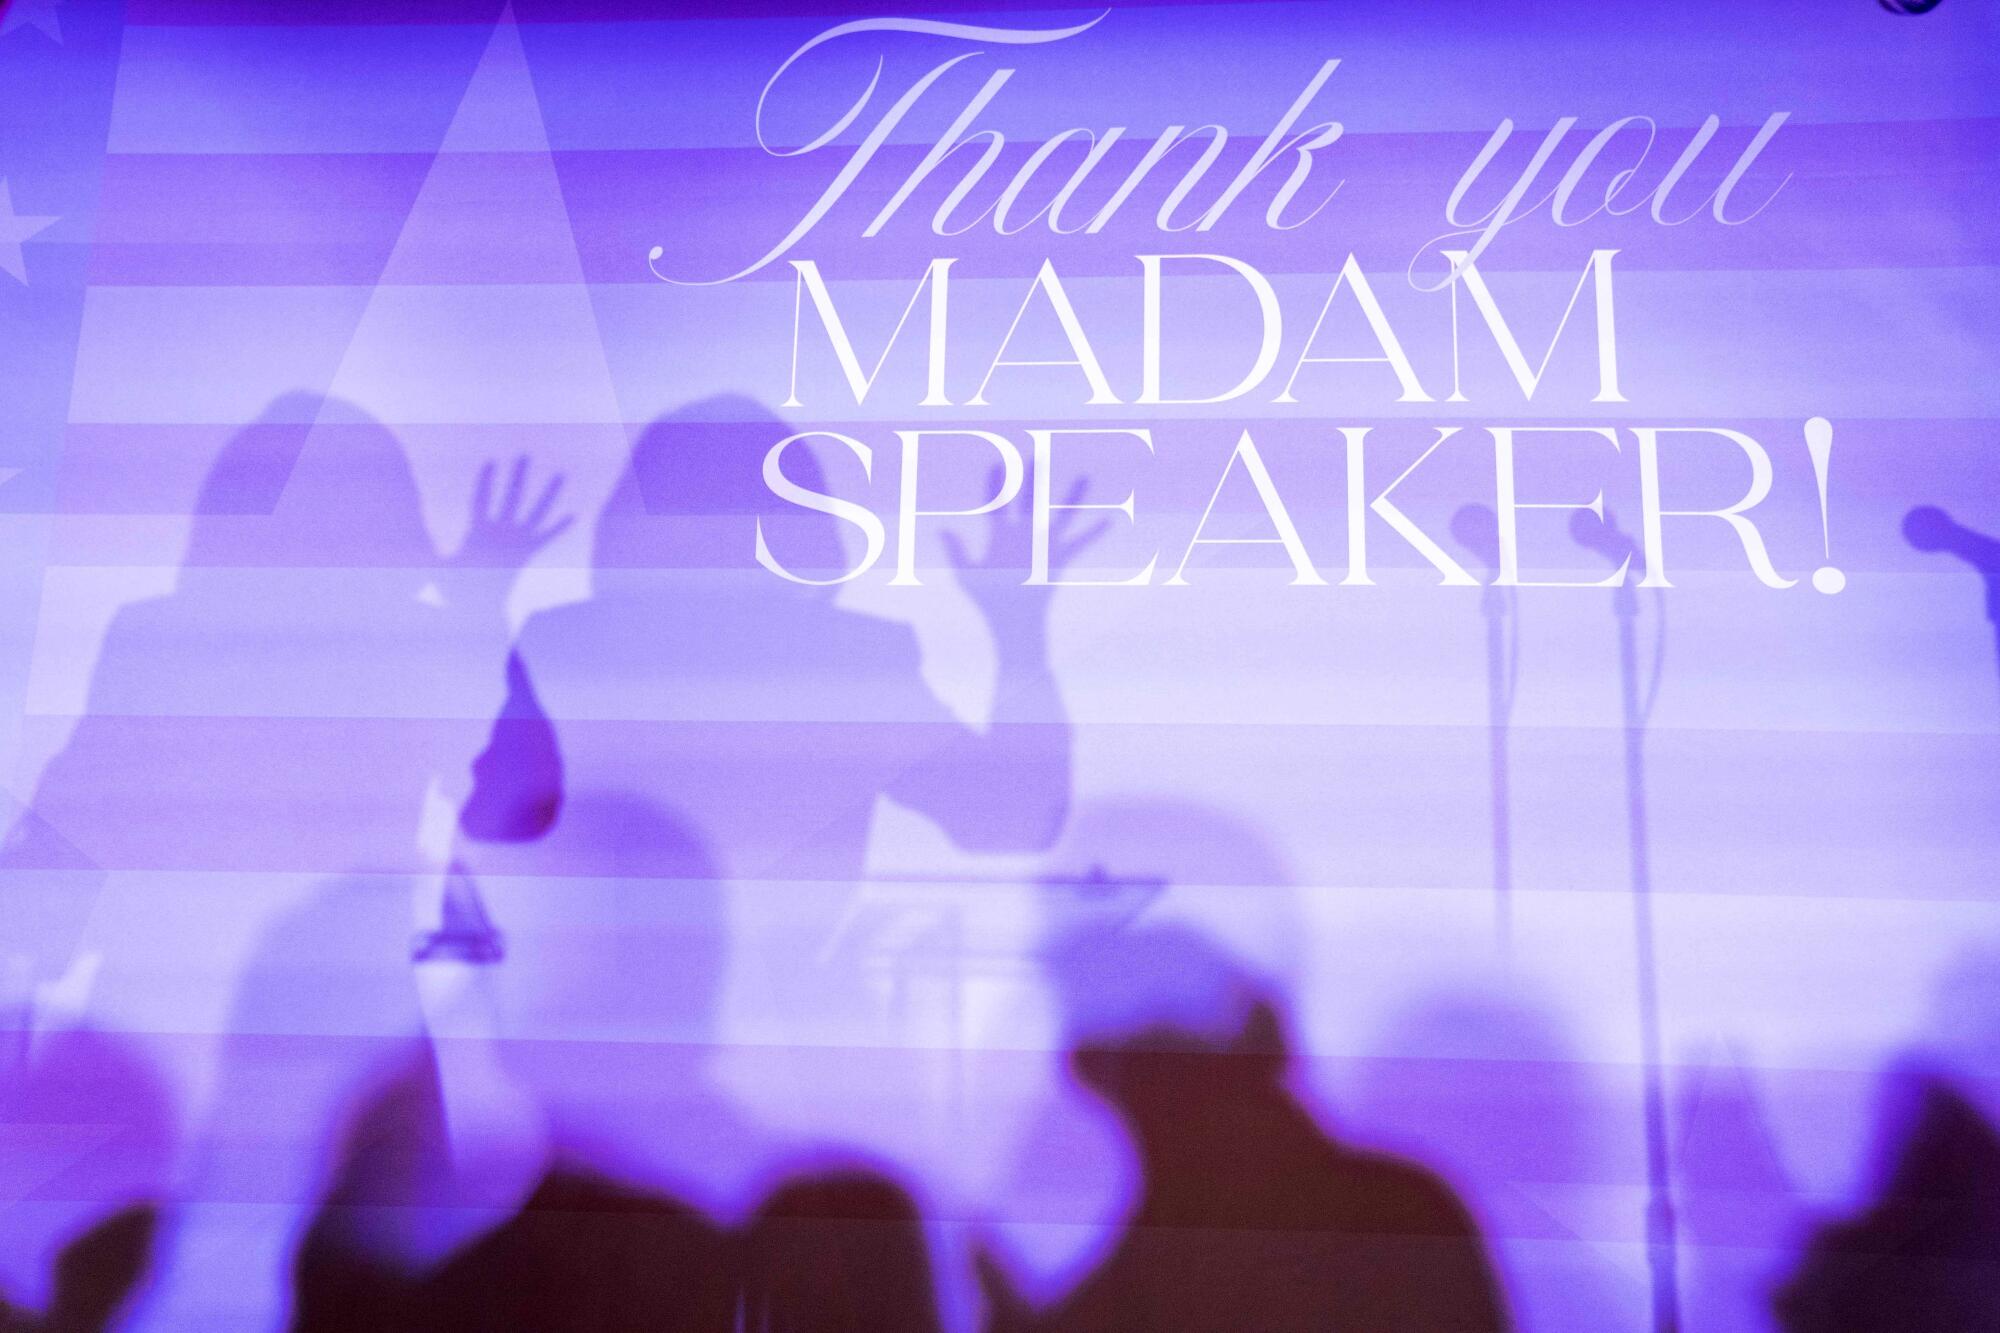 Nancy Pelosi speaks during an event titled "Thank You, Madam Speaker" at the St. Regis Hotel in Washington.